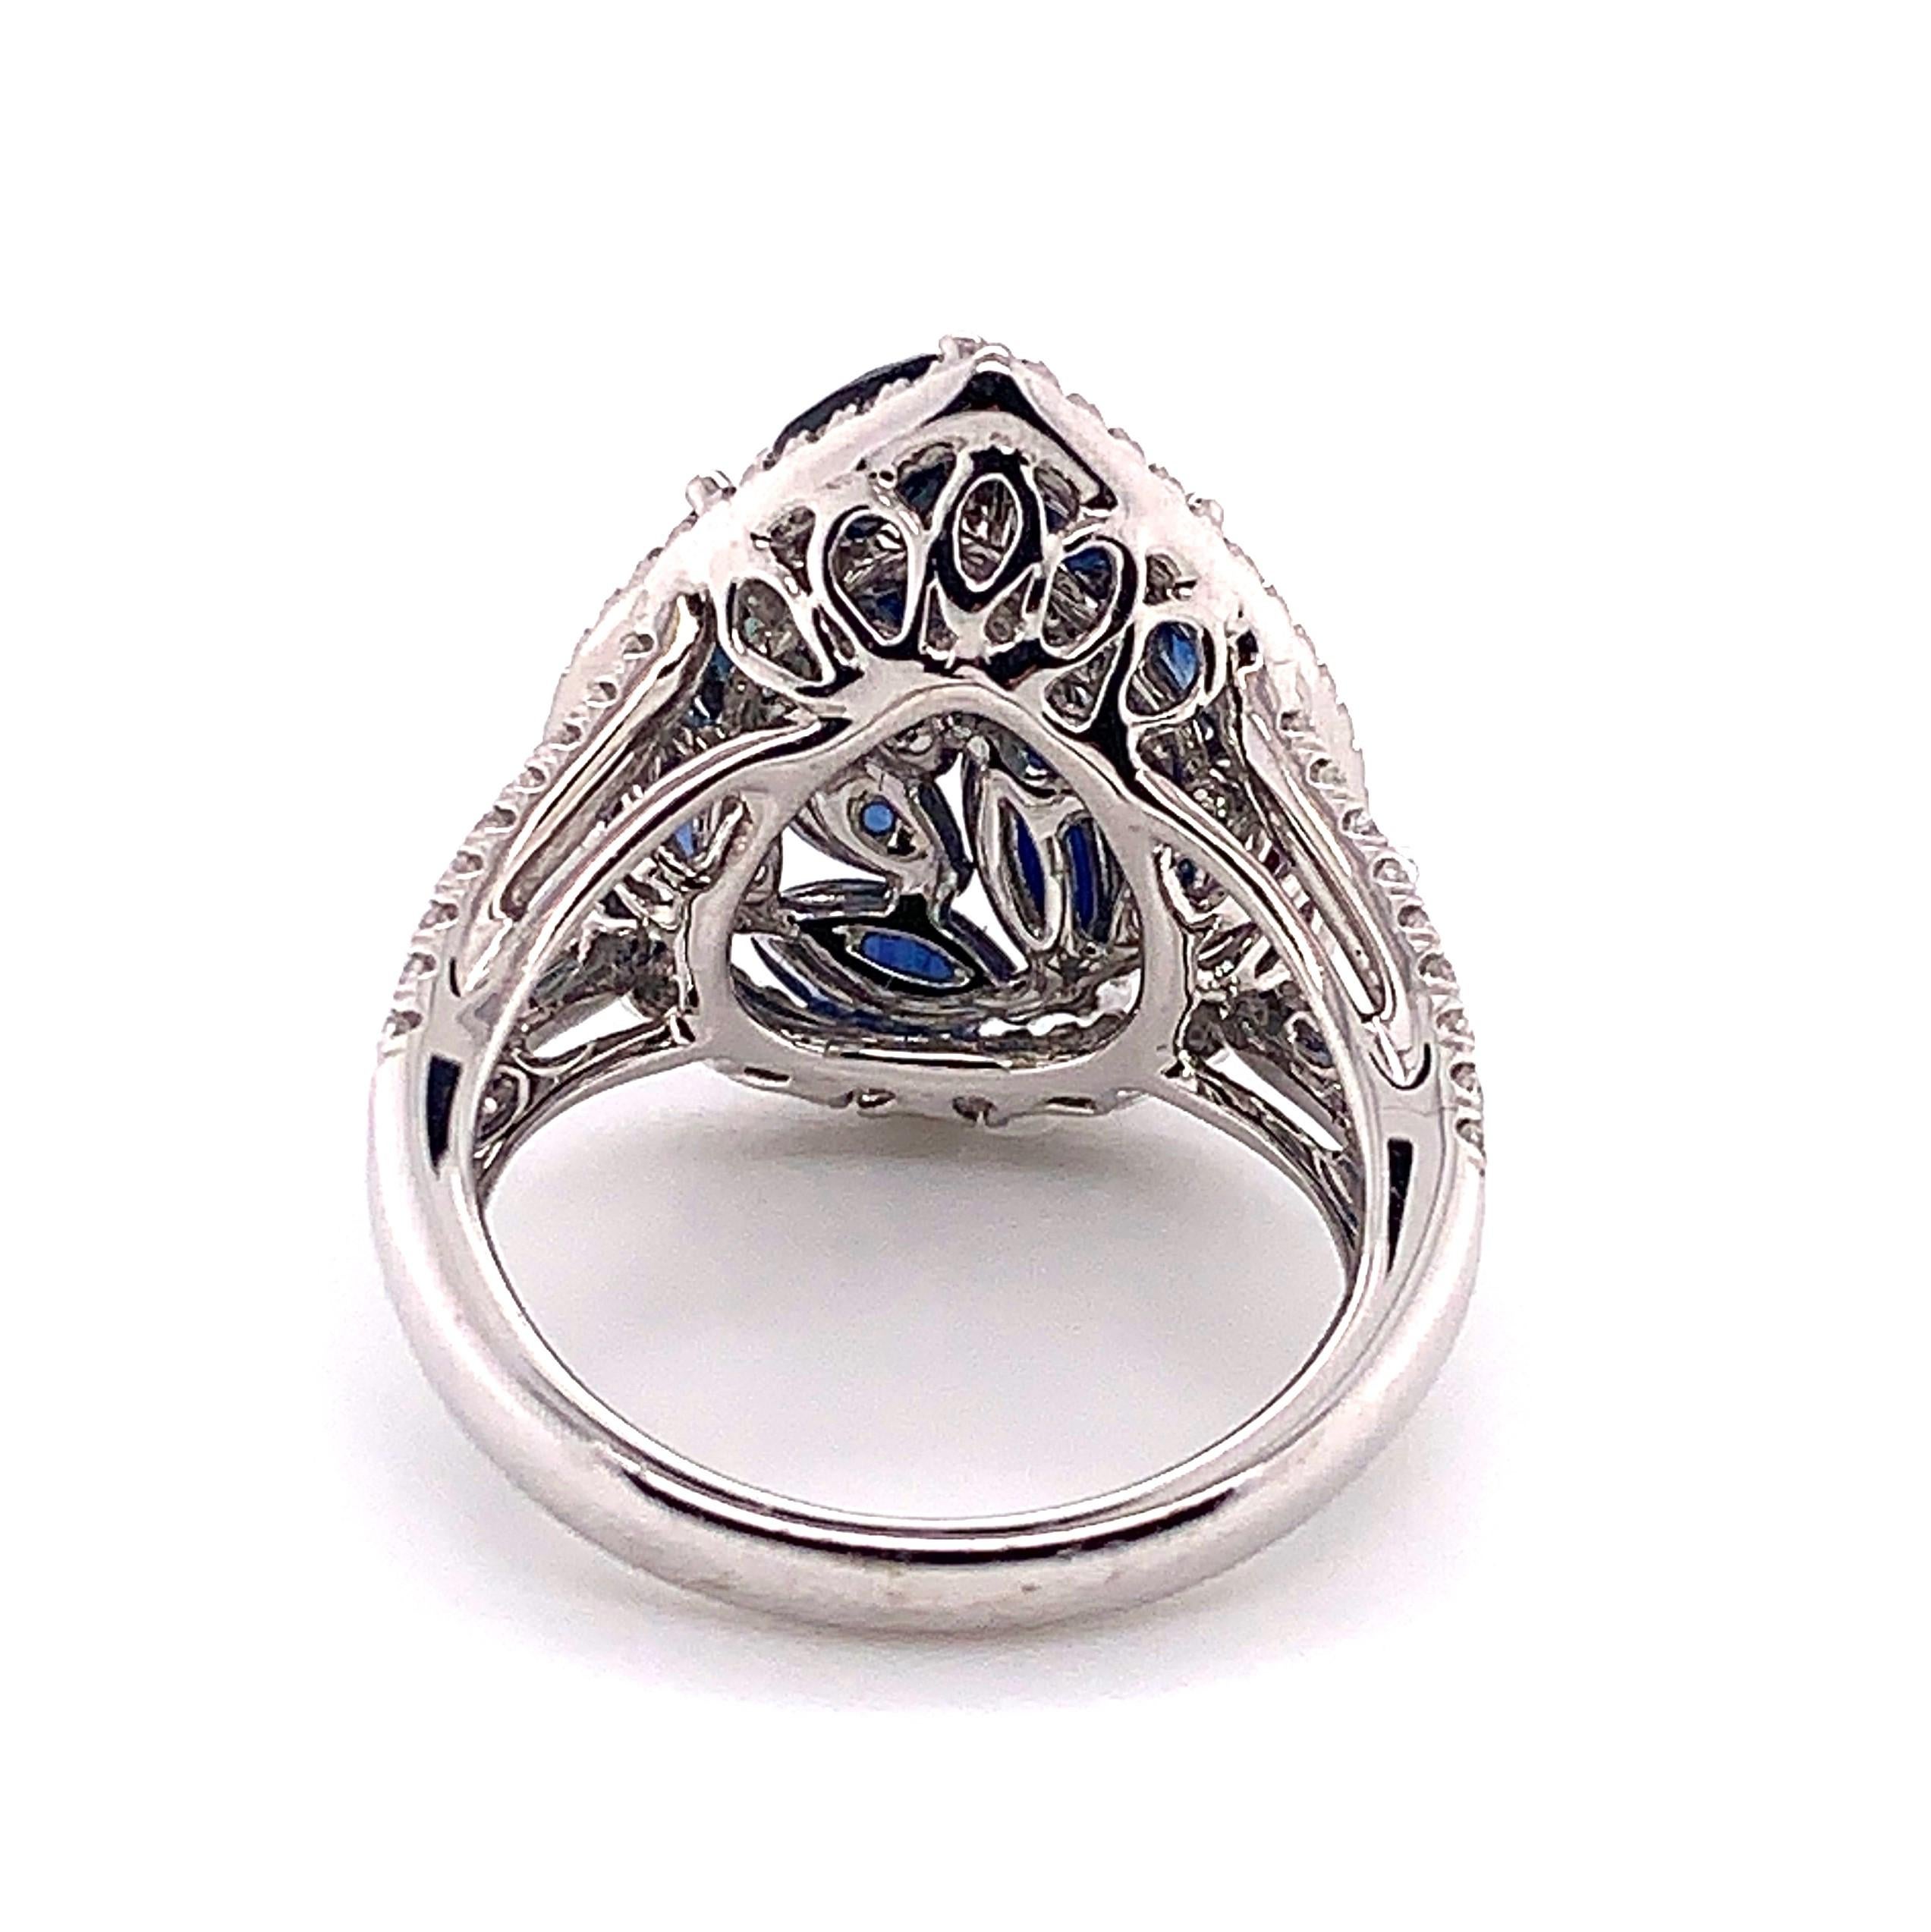 Women's or Men's 4.66 Carat Marquise Cut Blue Sapphire and Diamond Ring